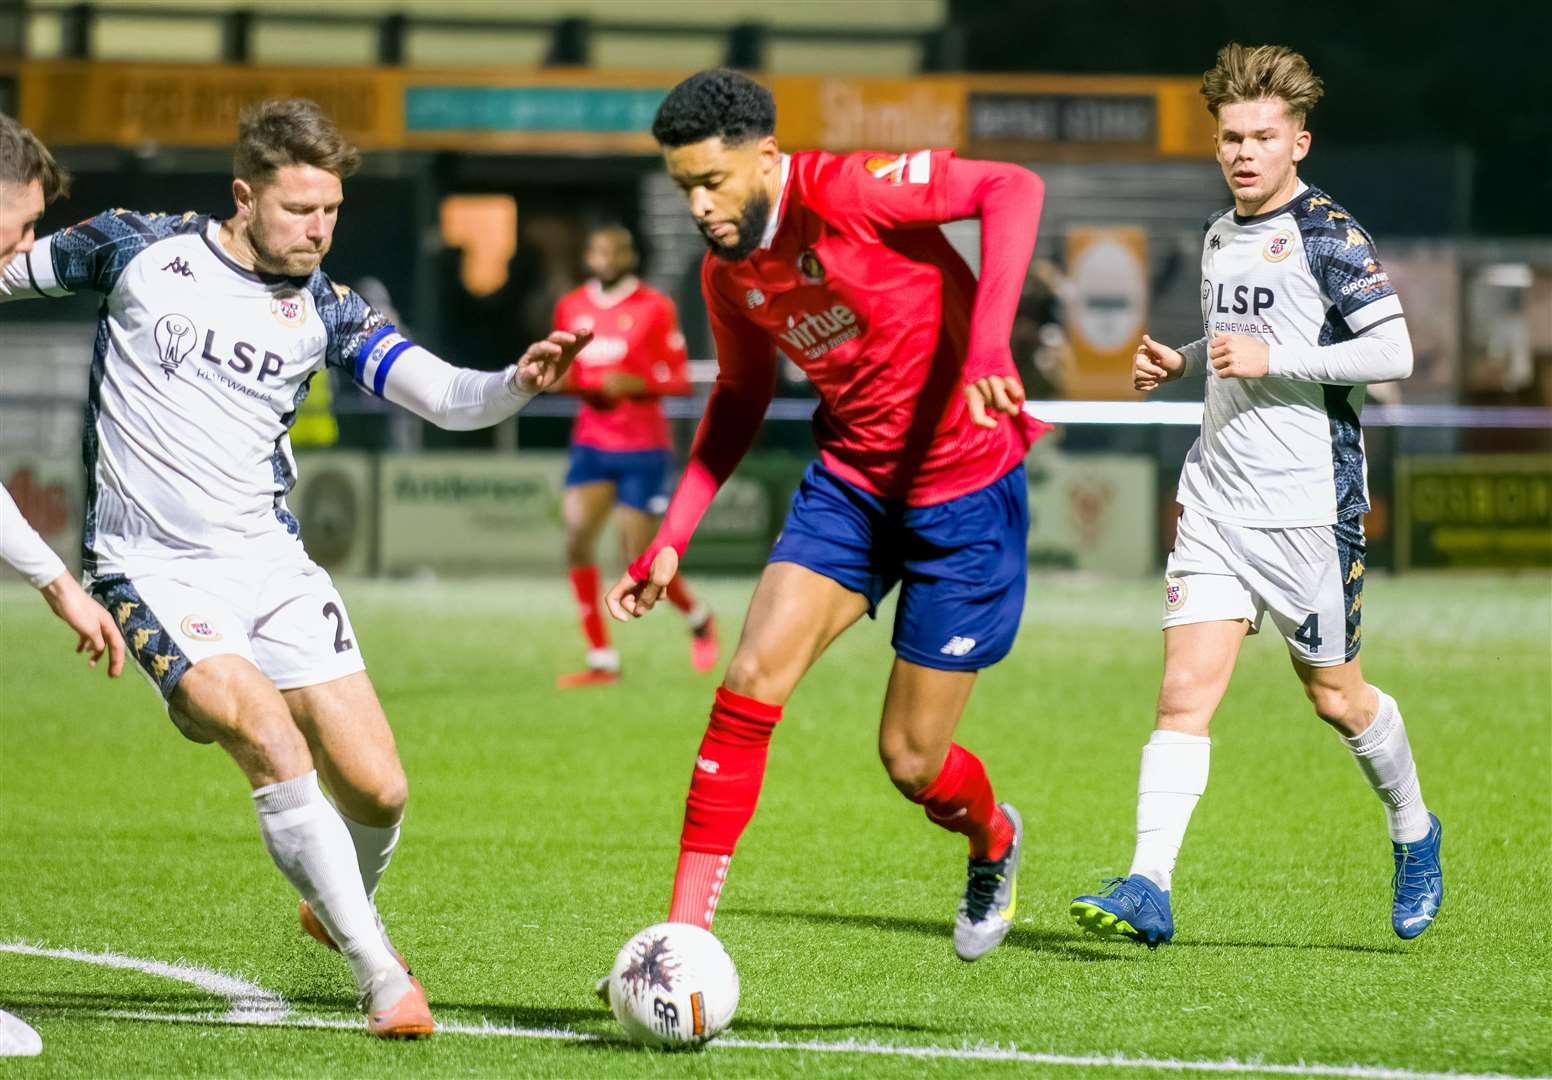 Dominic Samuel has given Ebbsfleet’s opponents something extra to worry about since his arrival. Picture: Ed Miller/EUFC